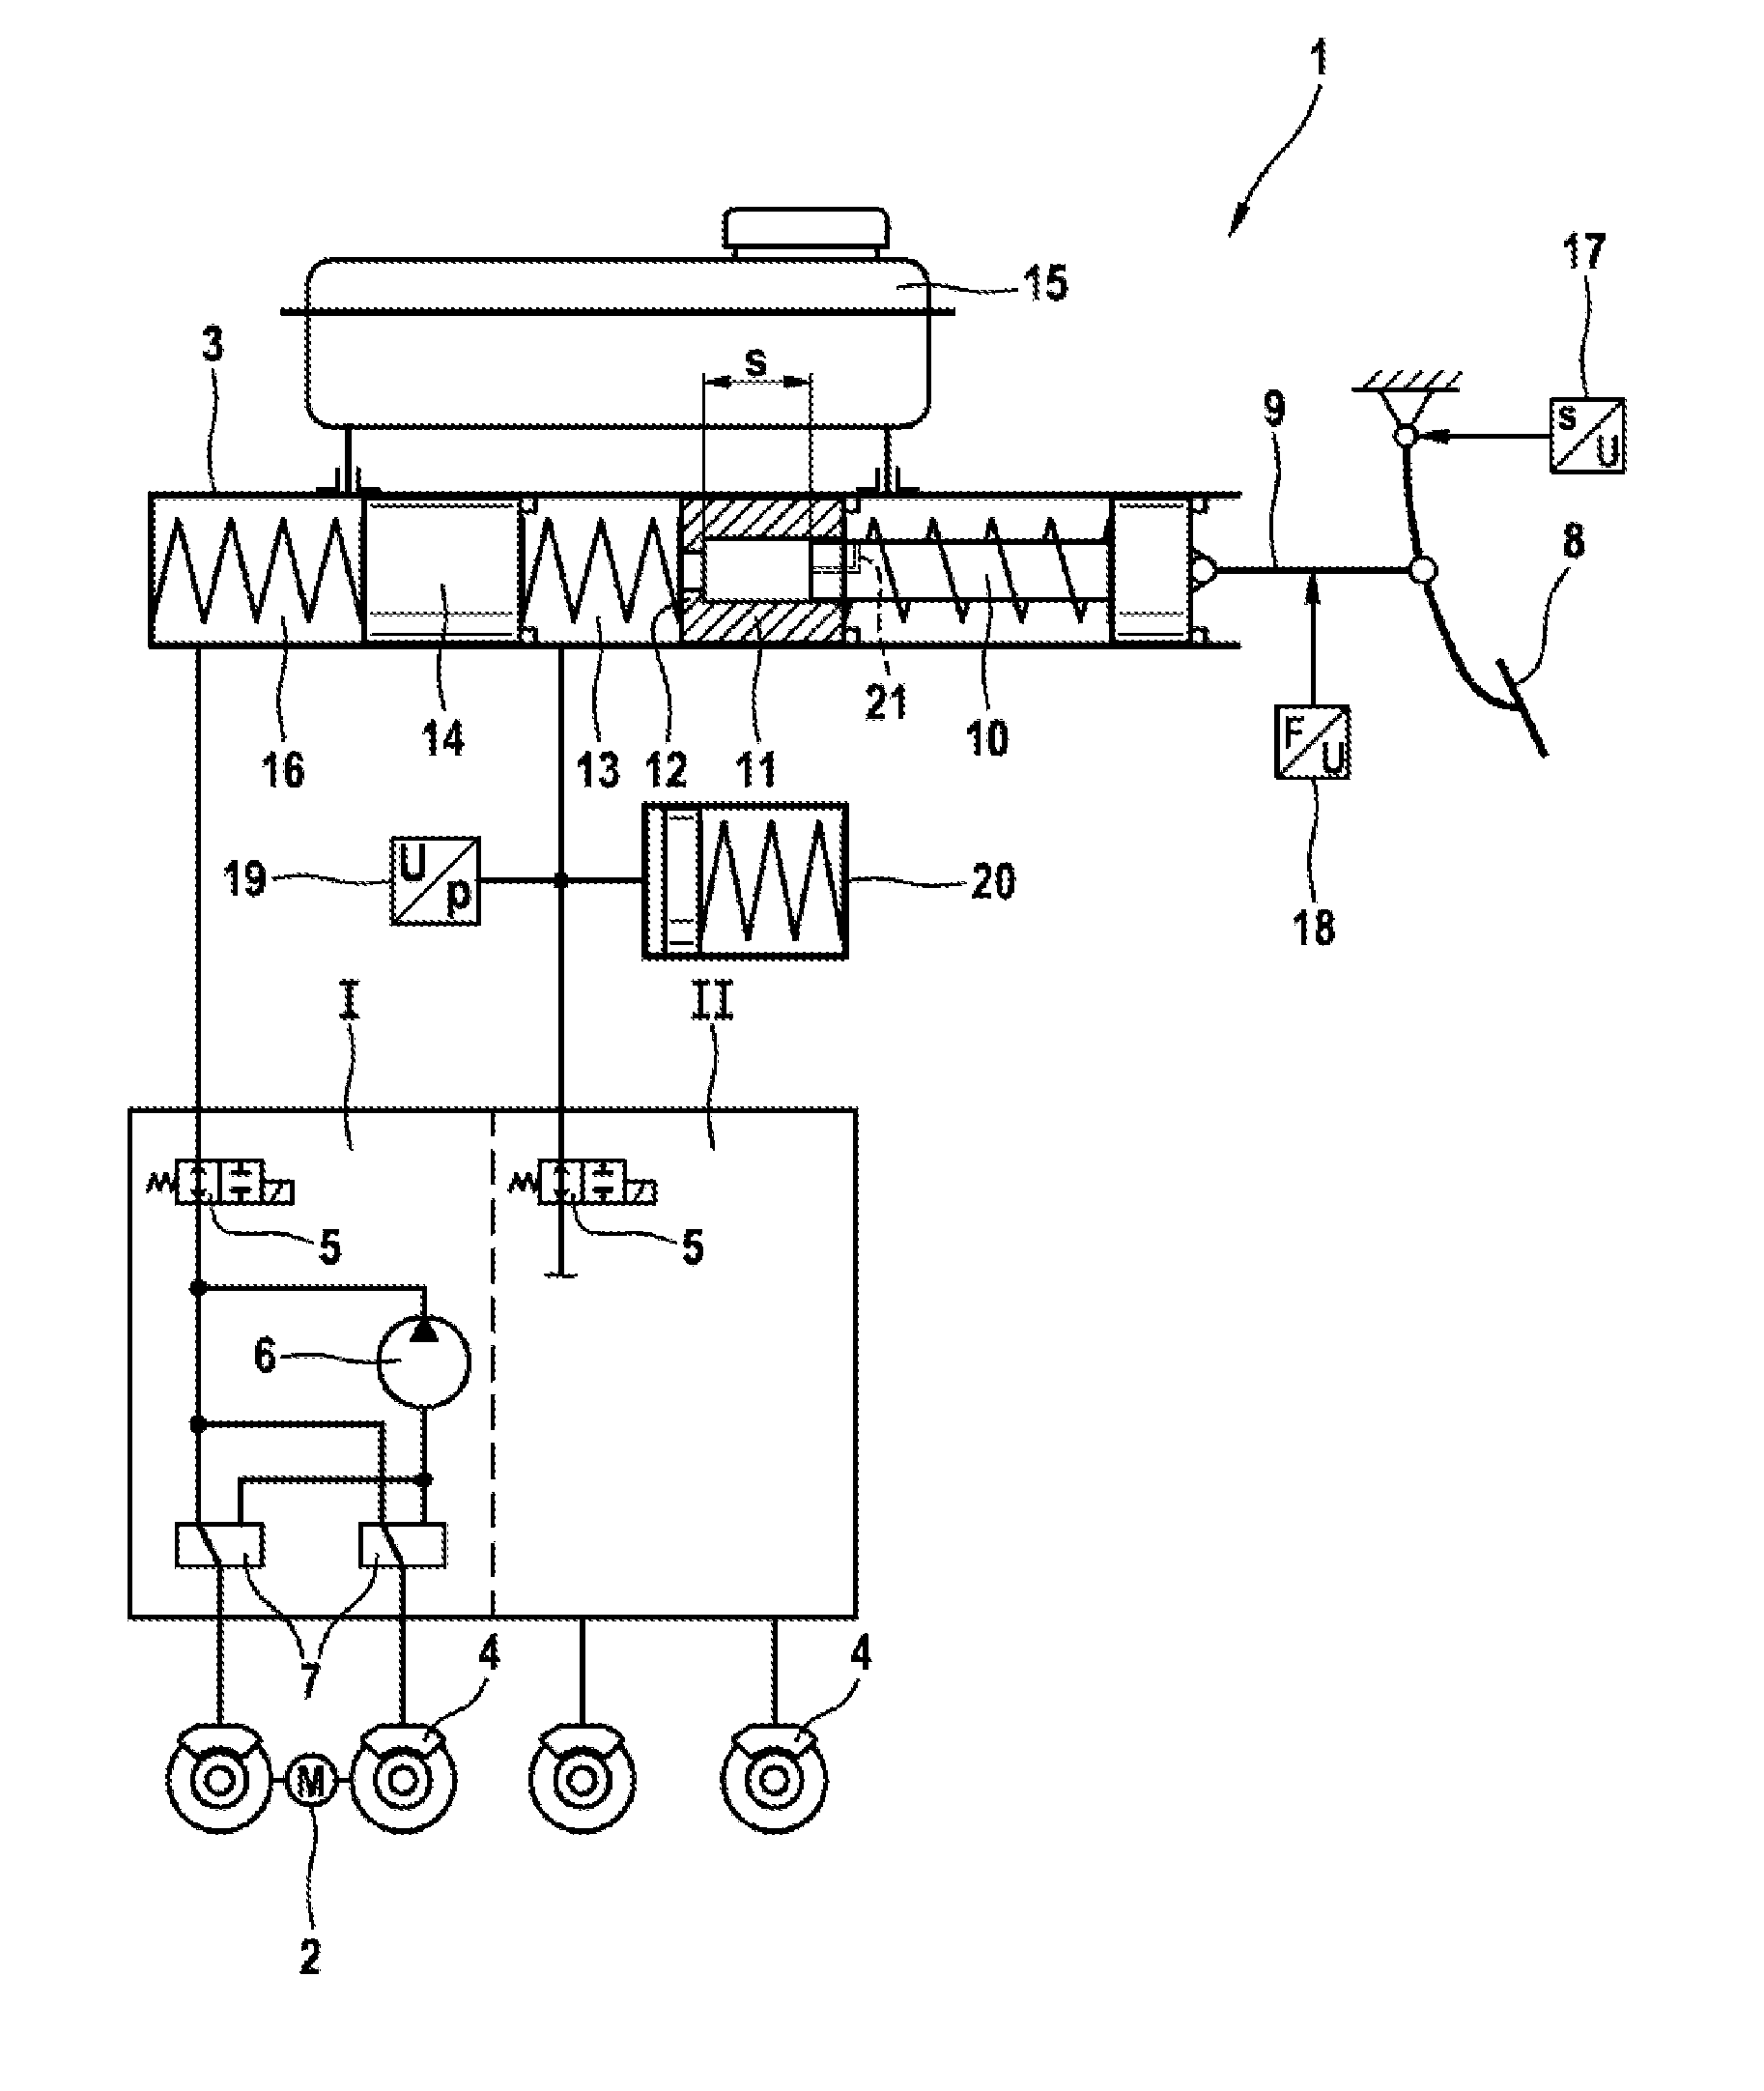 Main Brake Cylinder for a Hydraulic Vehicle Brake System and Method for Operating Same